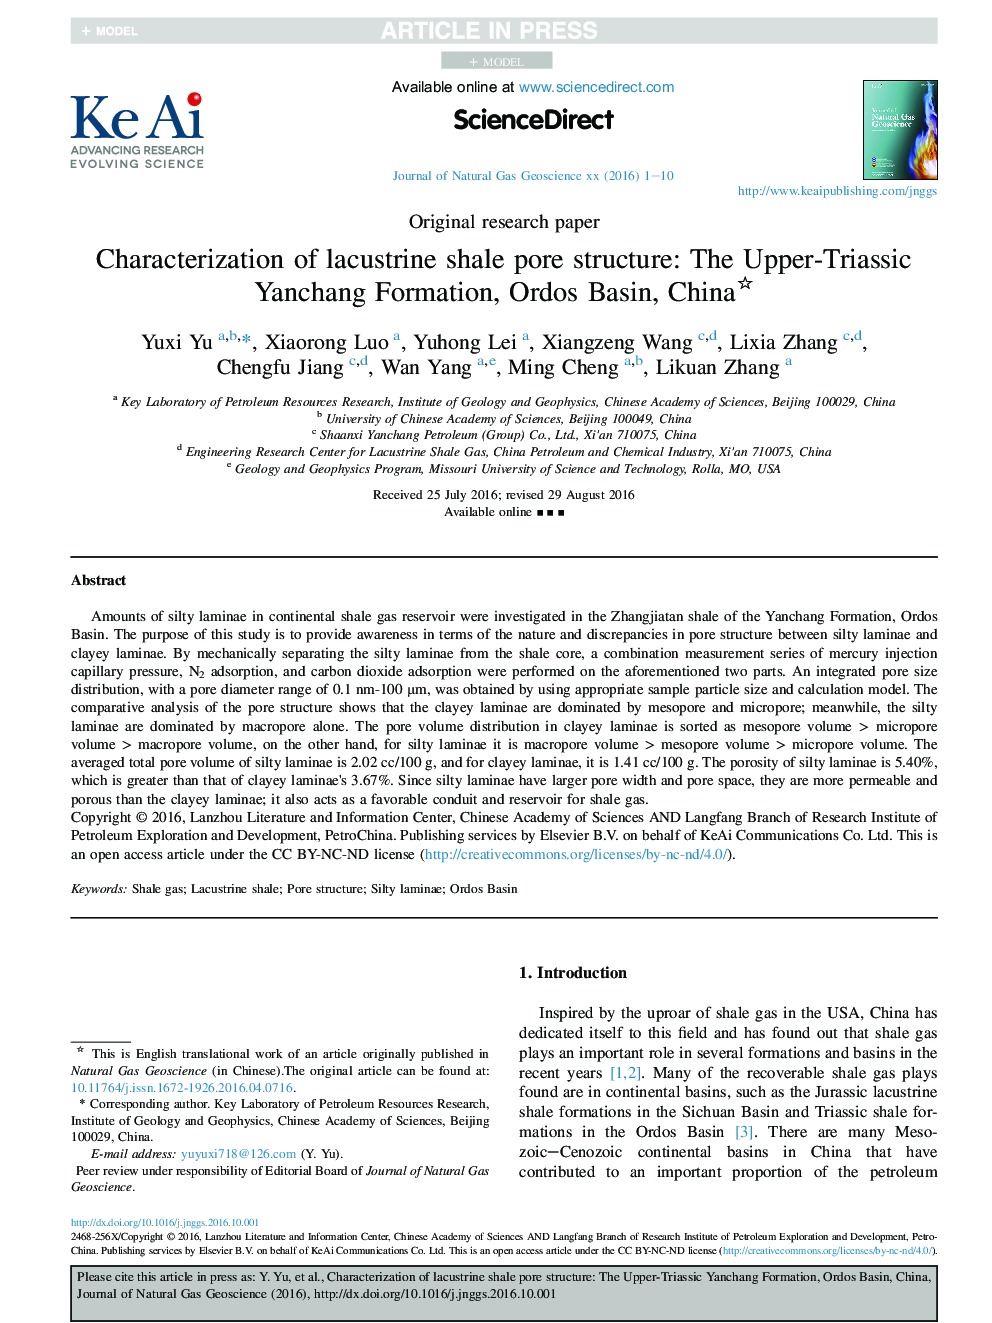 Characterization of lacustrine shale pore structure: The Upper-Triassic Yanchang Formation, Ordos Basin, China